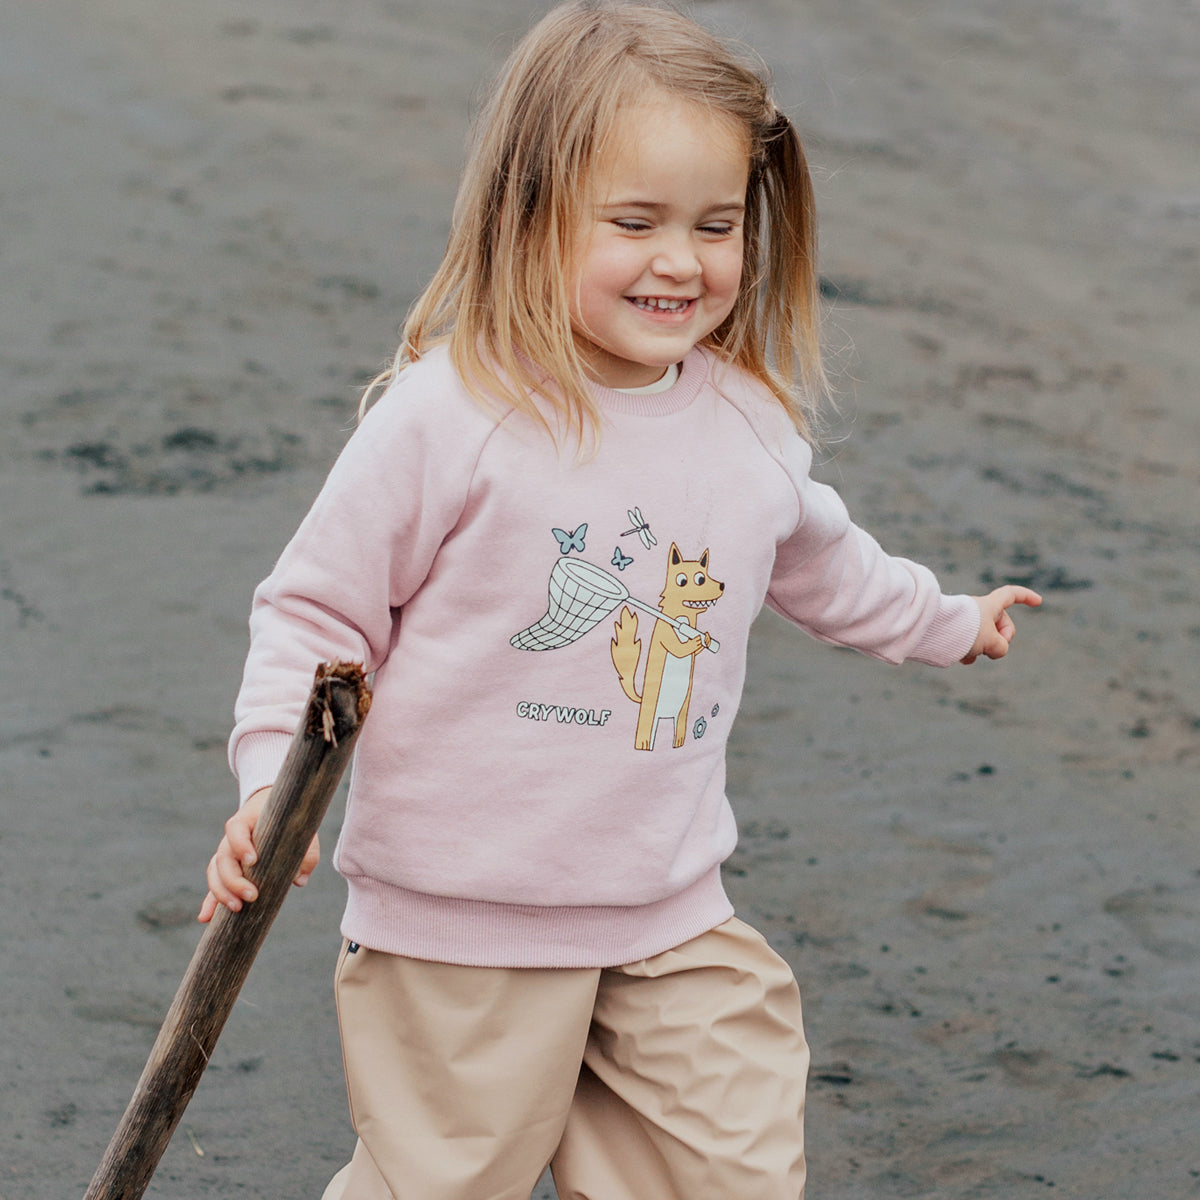 Sunday Sweater - Butterfly Catcher-Baby & Toddler Clothing-Crywolf Child-1-Little Soldiers